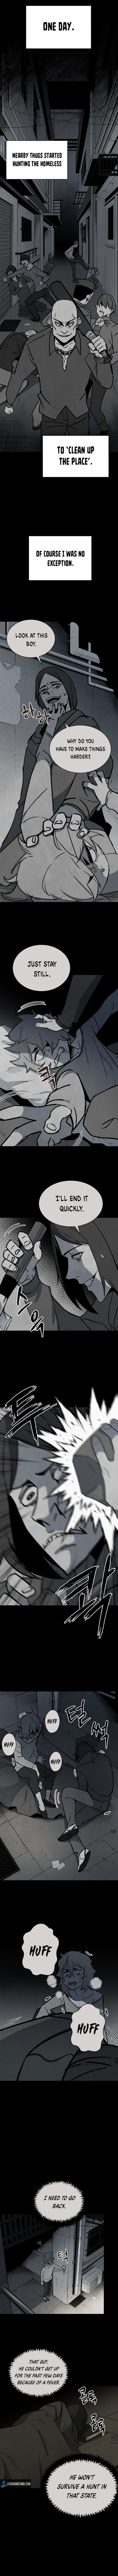 the-descent-of-the-demonic-master-chap-31-3